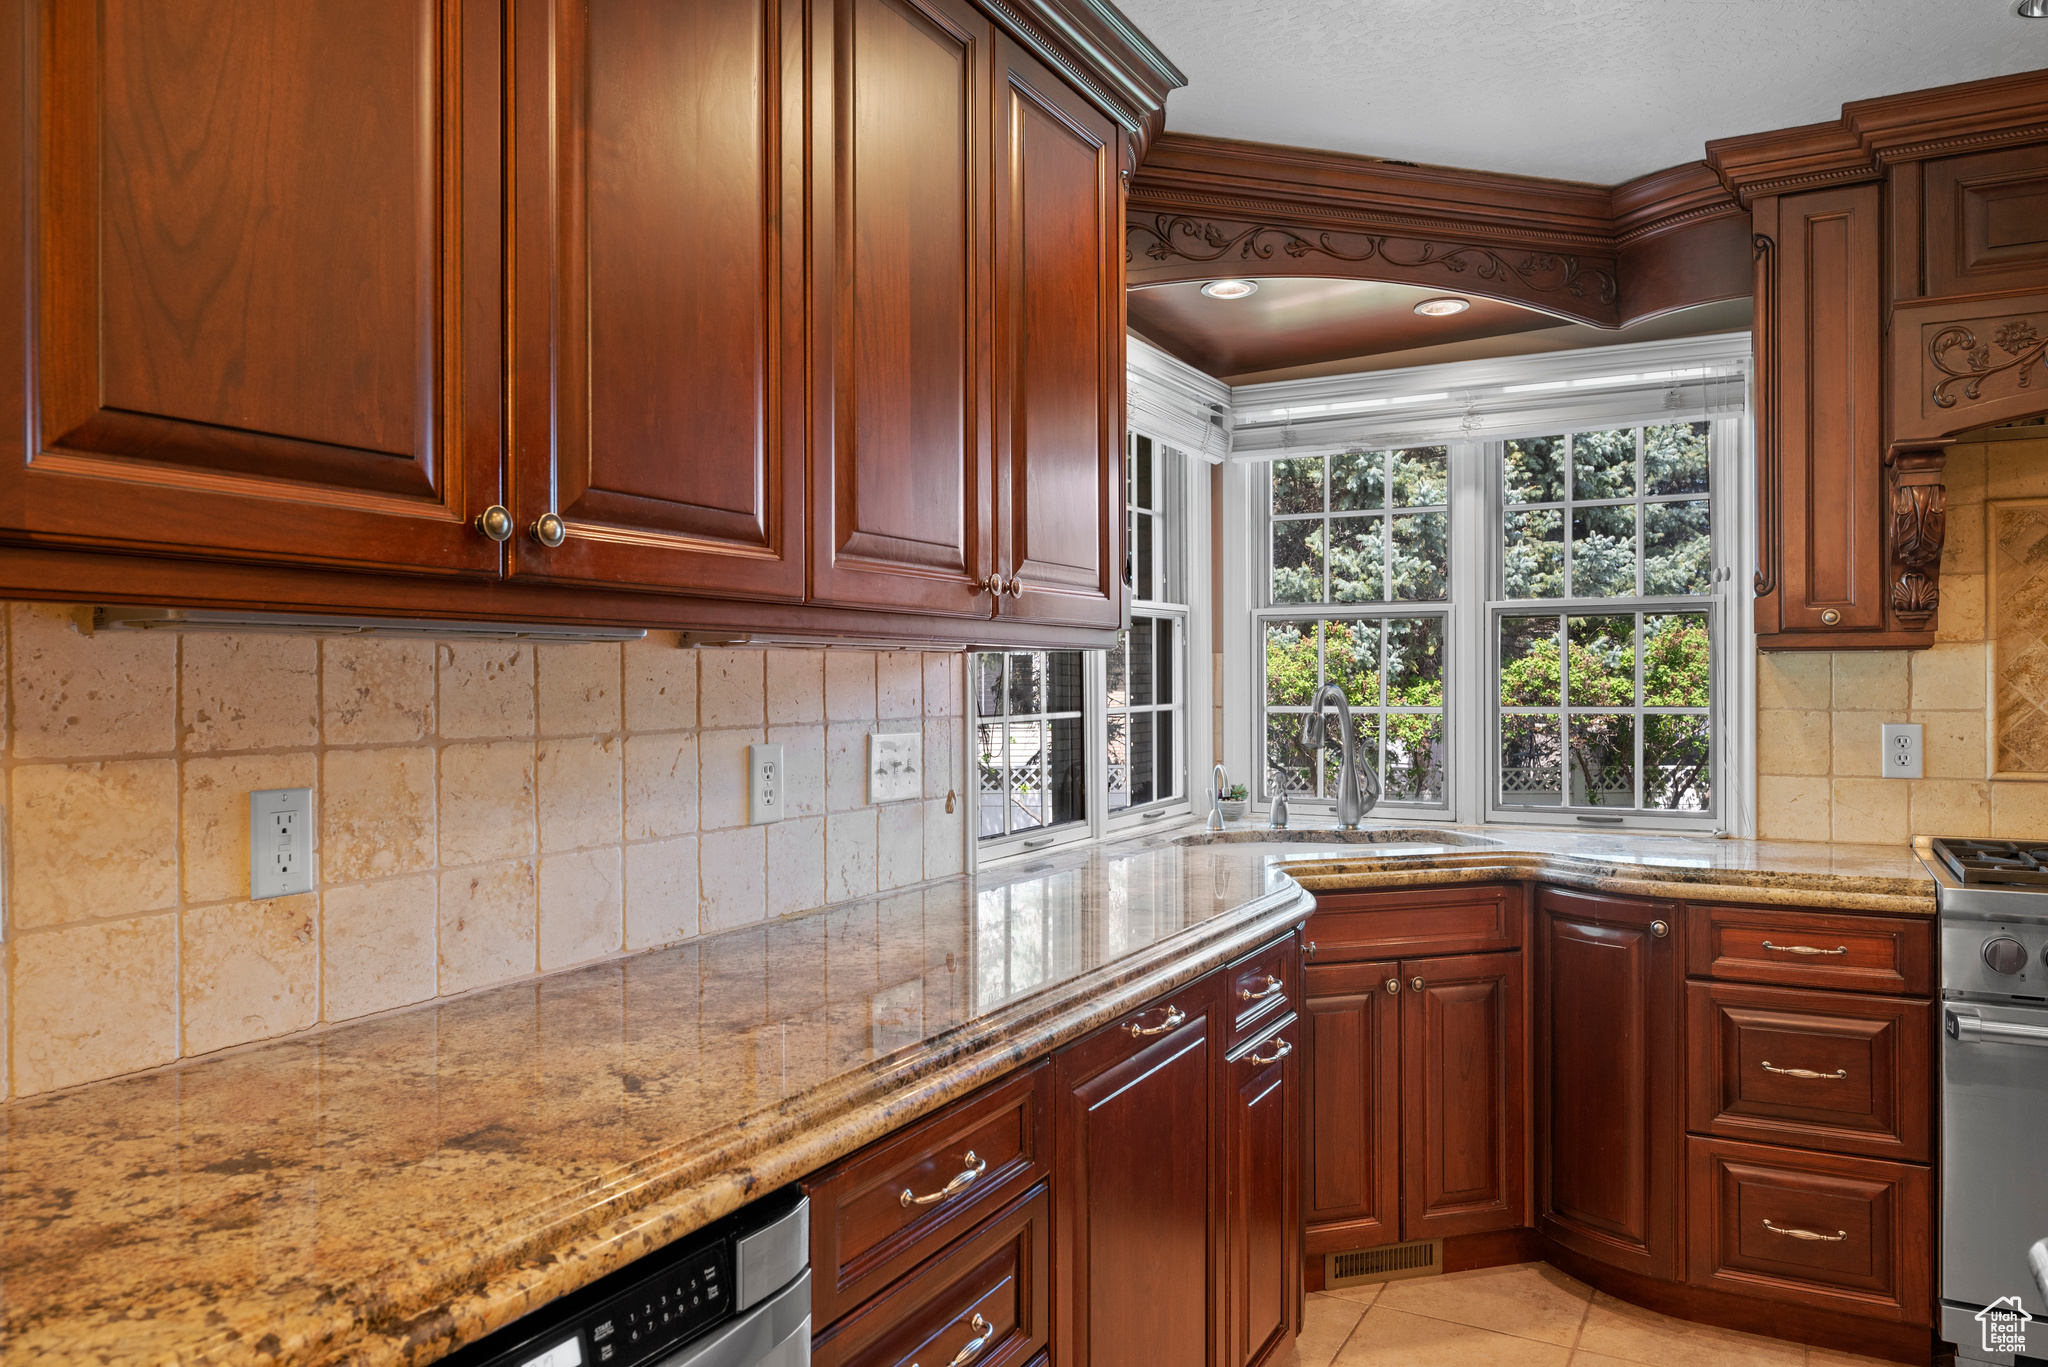 Kitchen with stainless steel gas range, sink, tasteful backsplash, and light stone counters